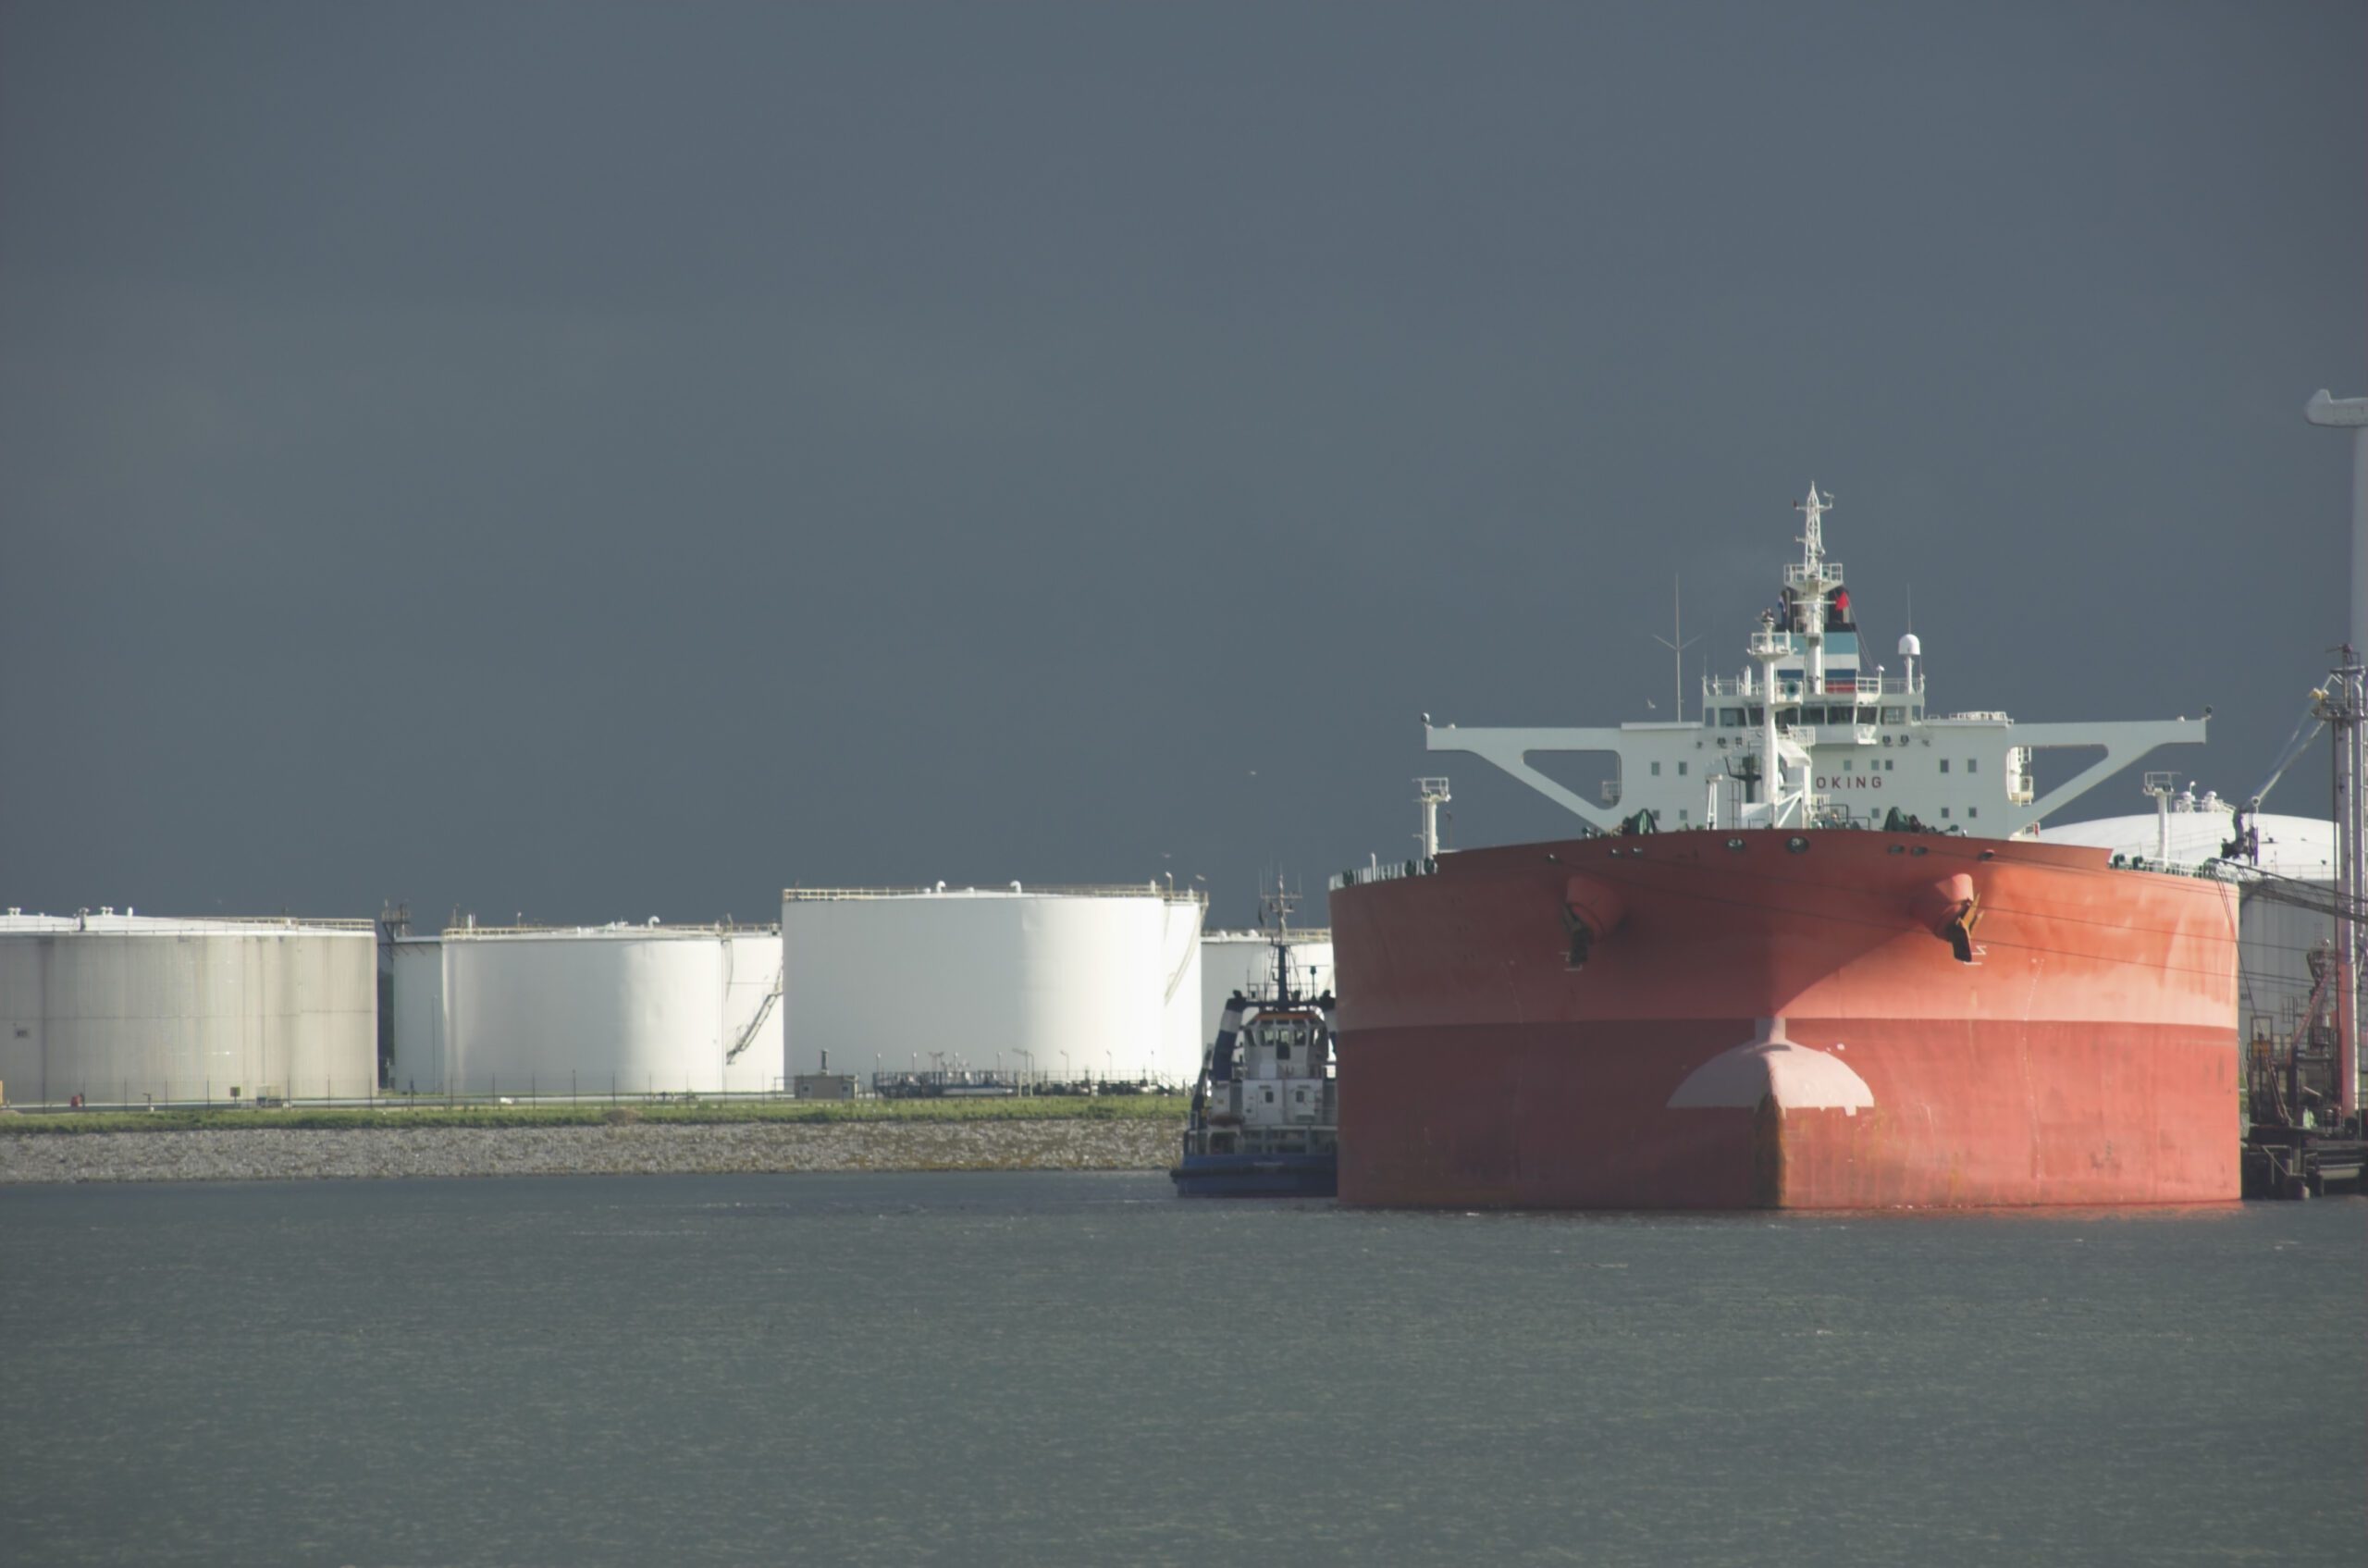 Product oil tanker in harbour with storage tanks.